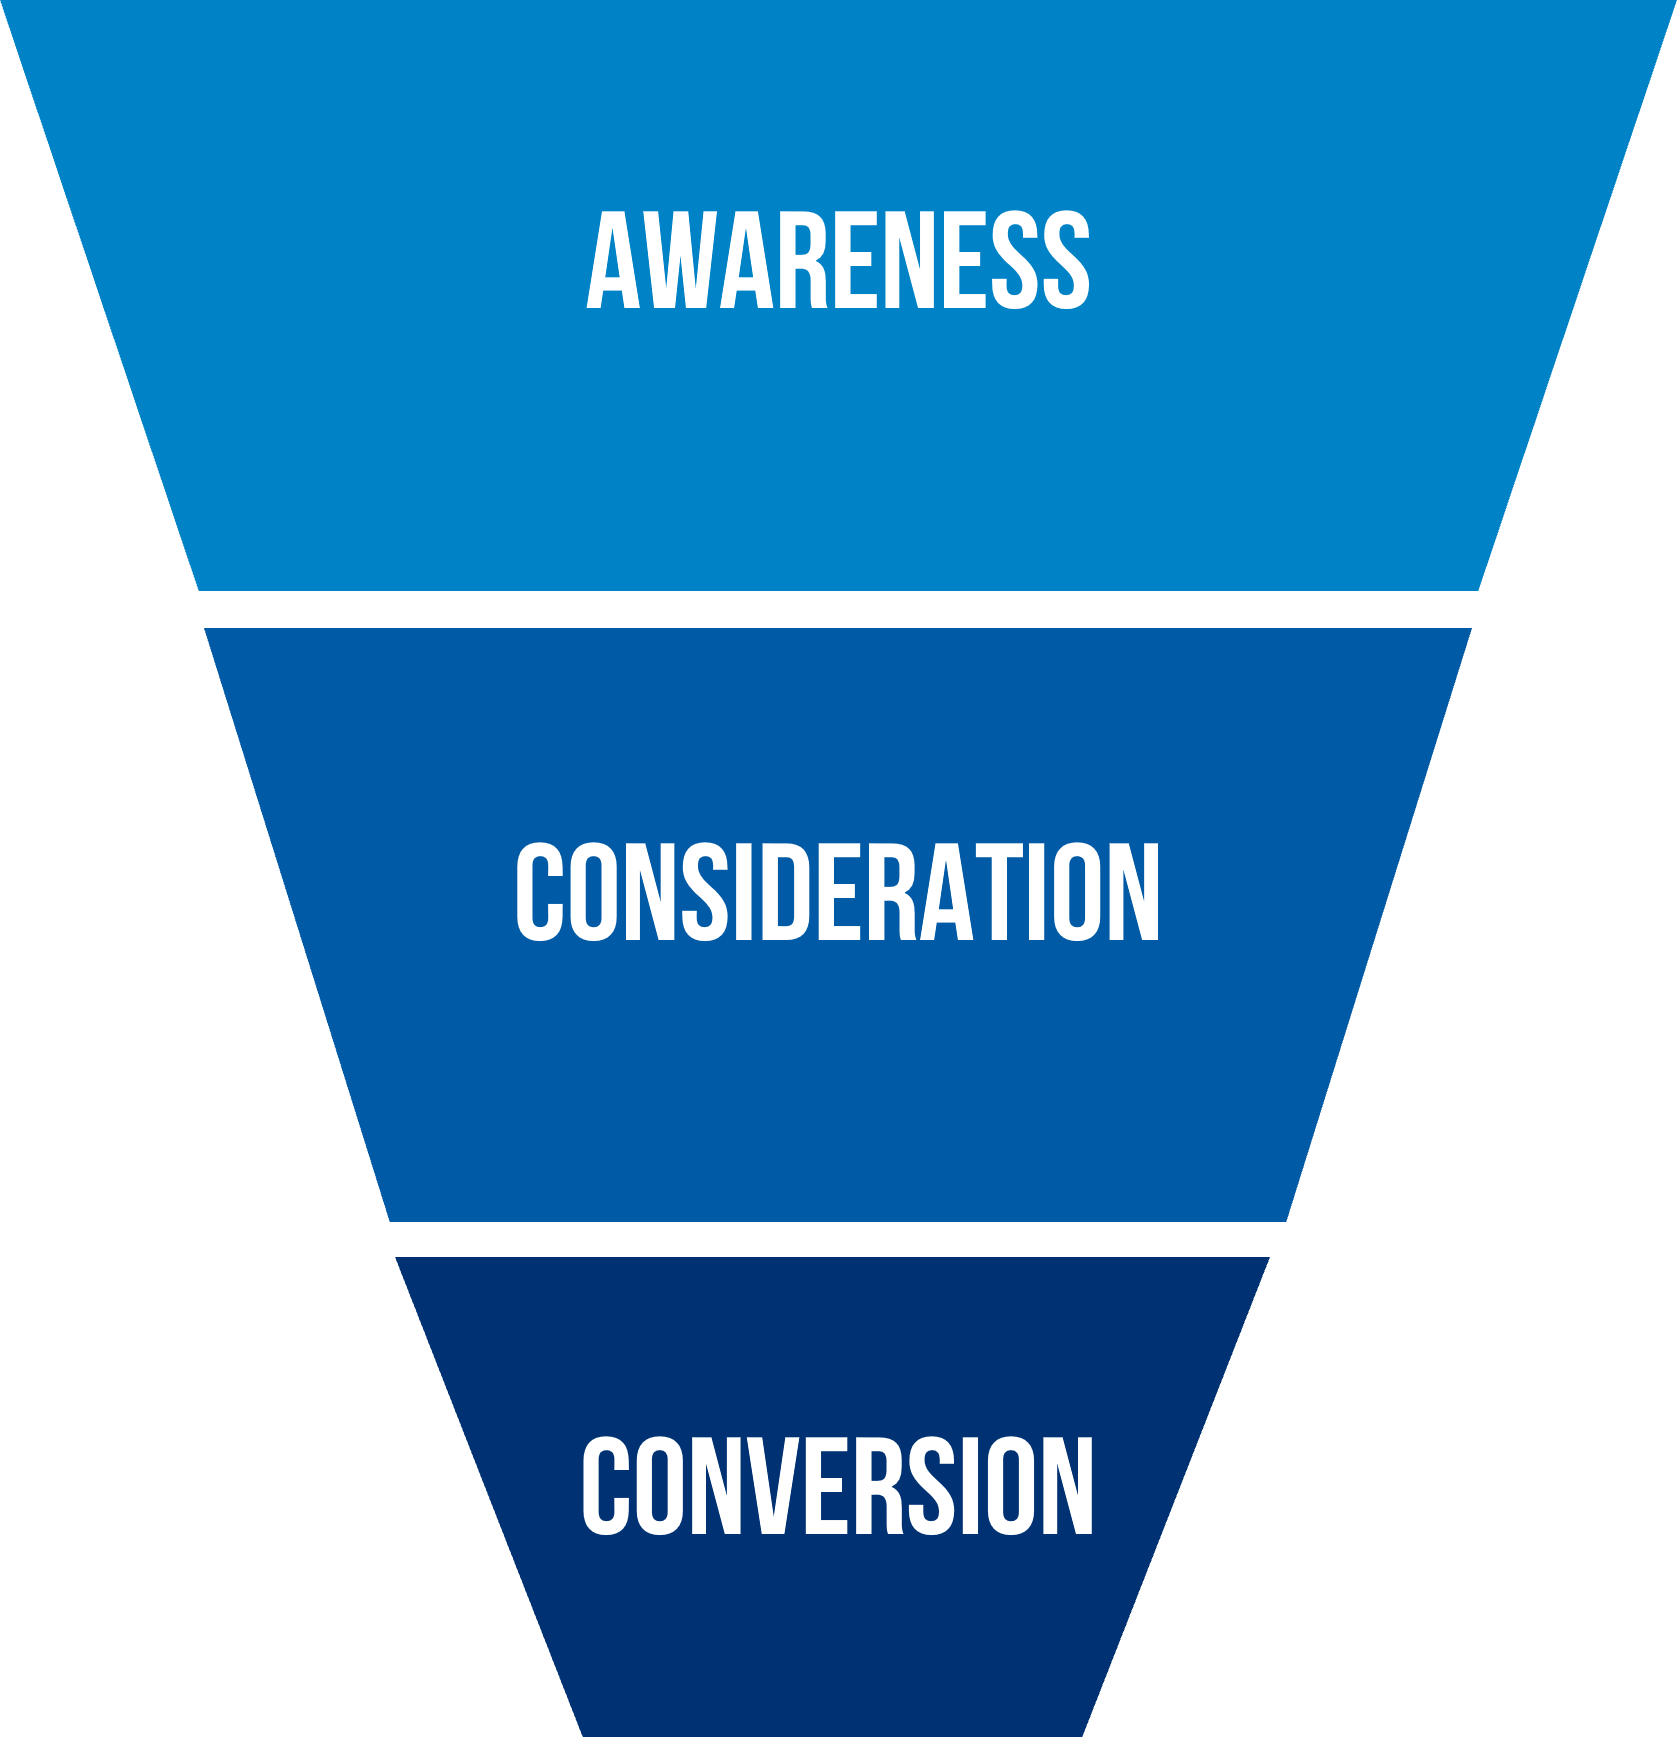 Marketing funnel, top to bottom: awareness, consideration, and conversion